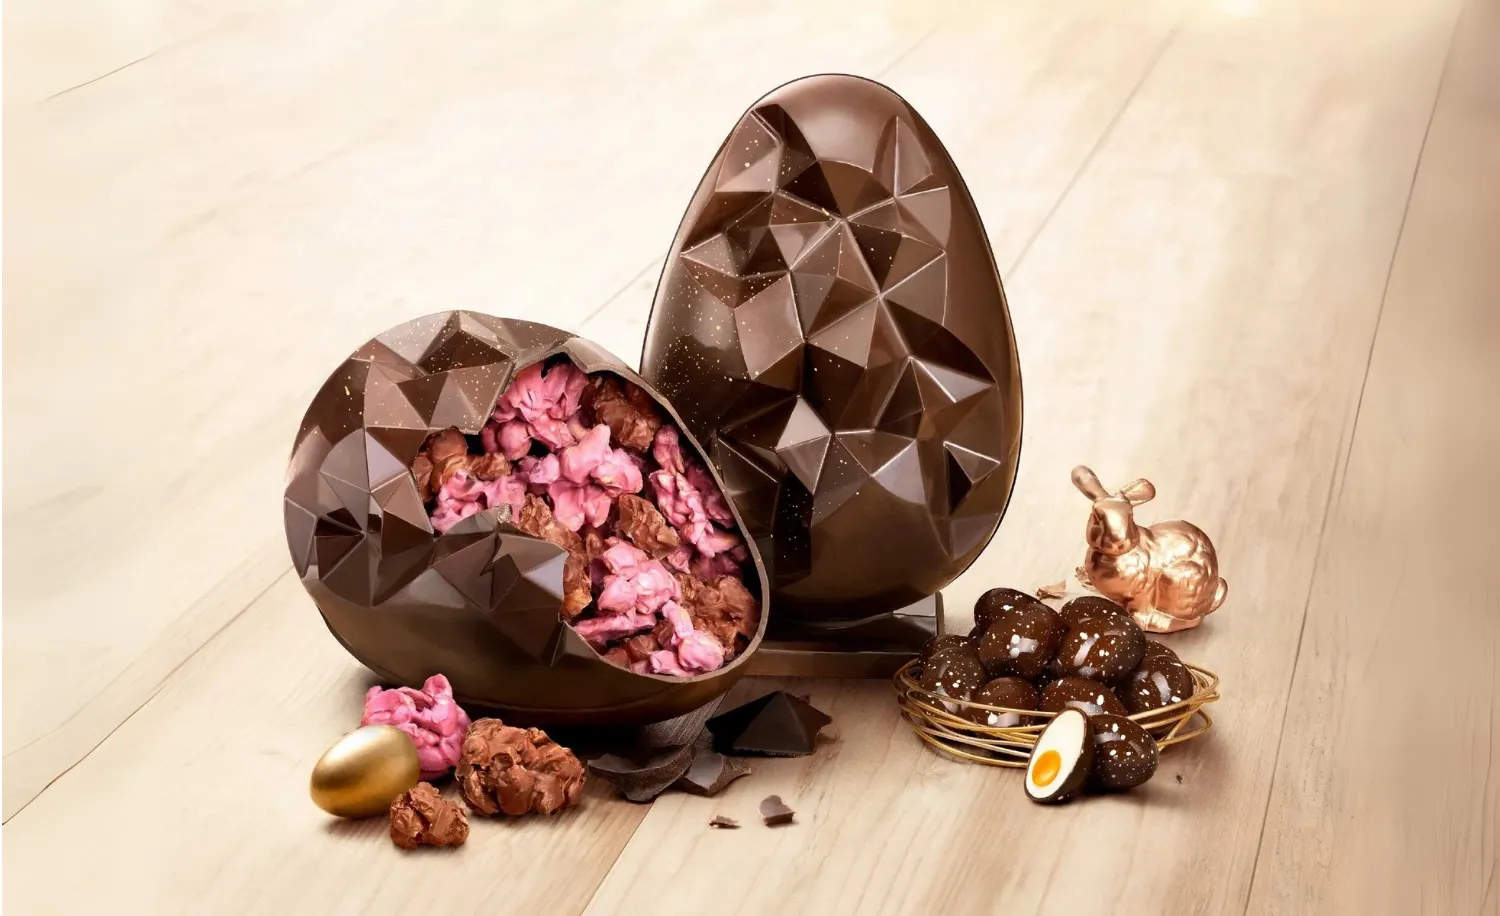 Fabelle to sweeten Easter with exquisite offerings